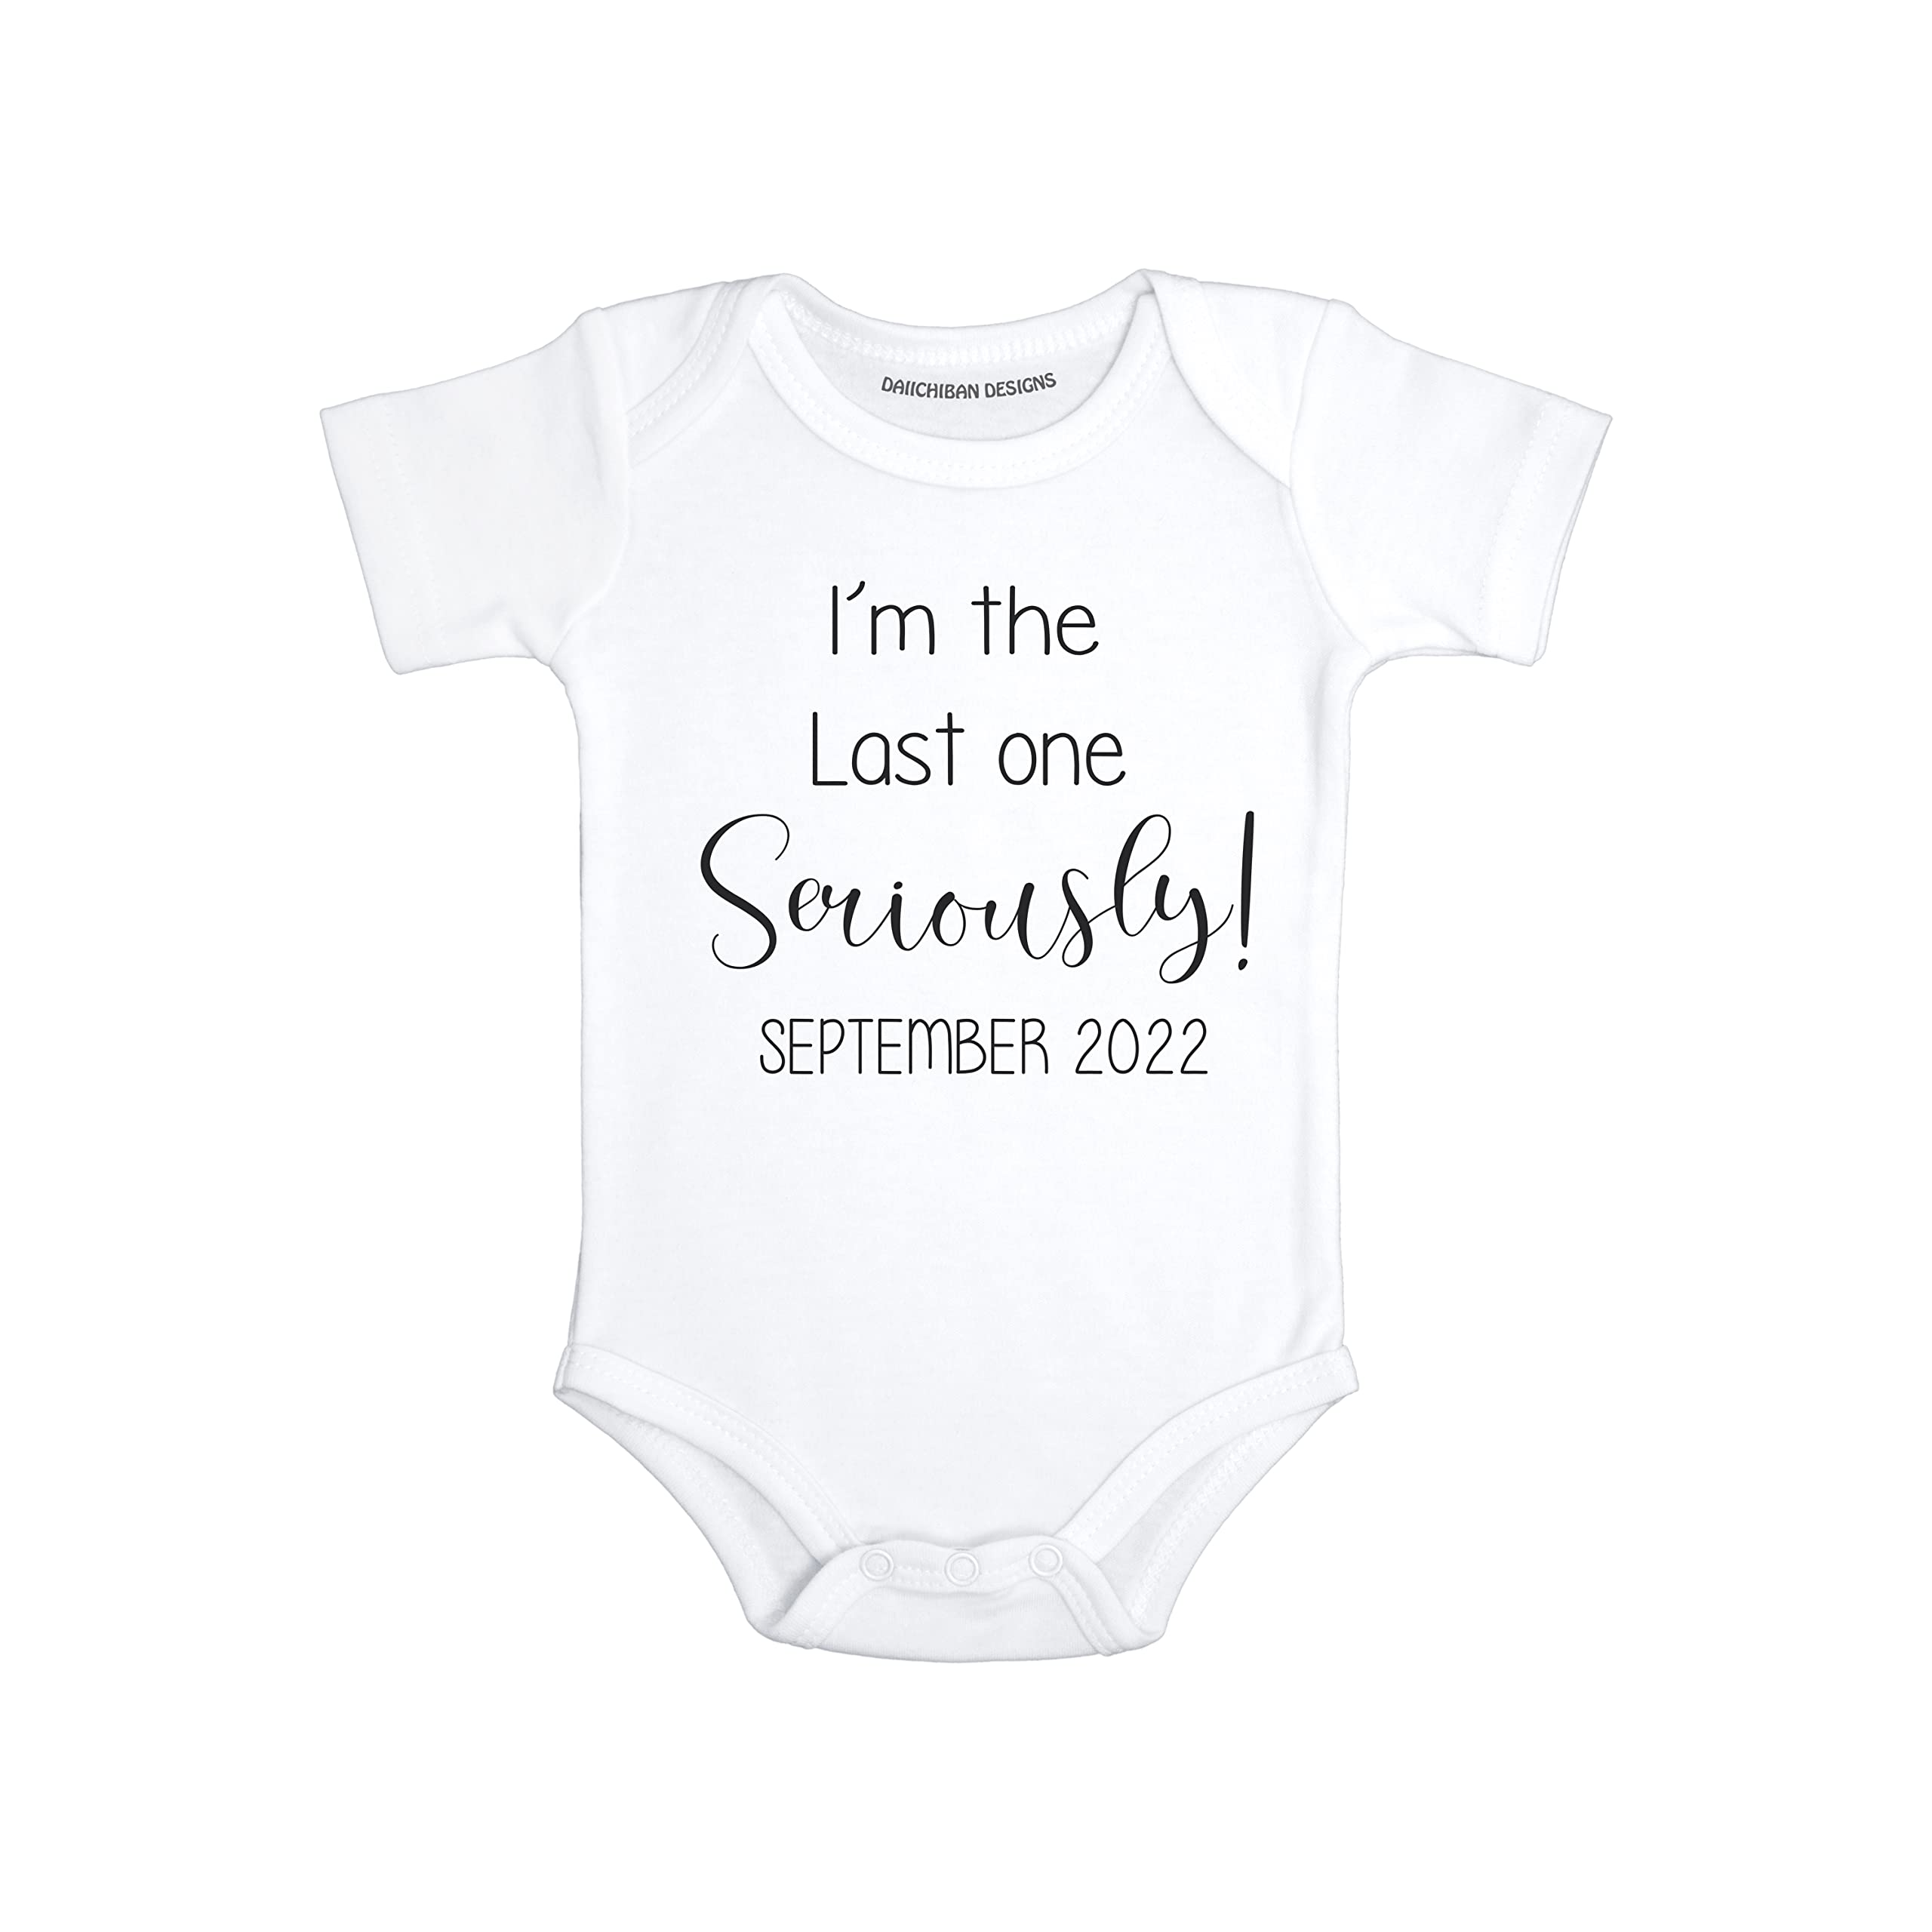 Last One Seriously Funny baby announcement for family second third child announcement gifts